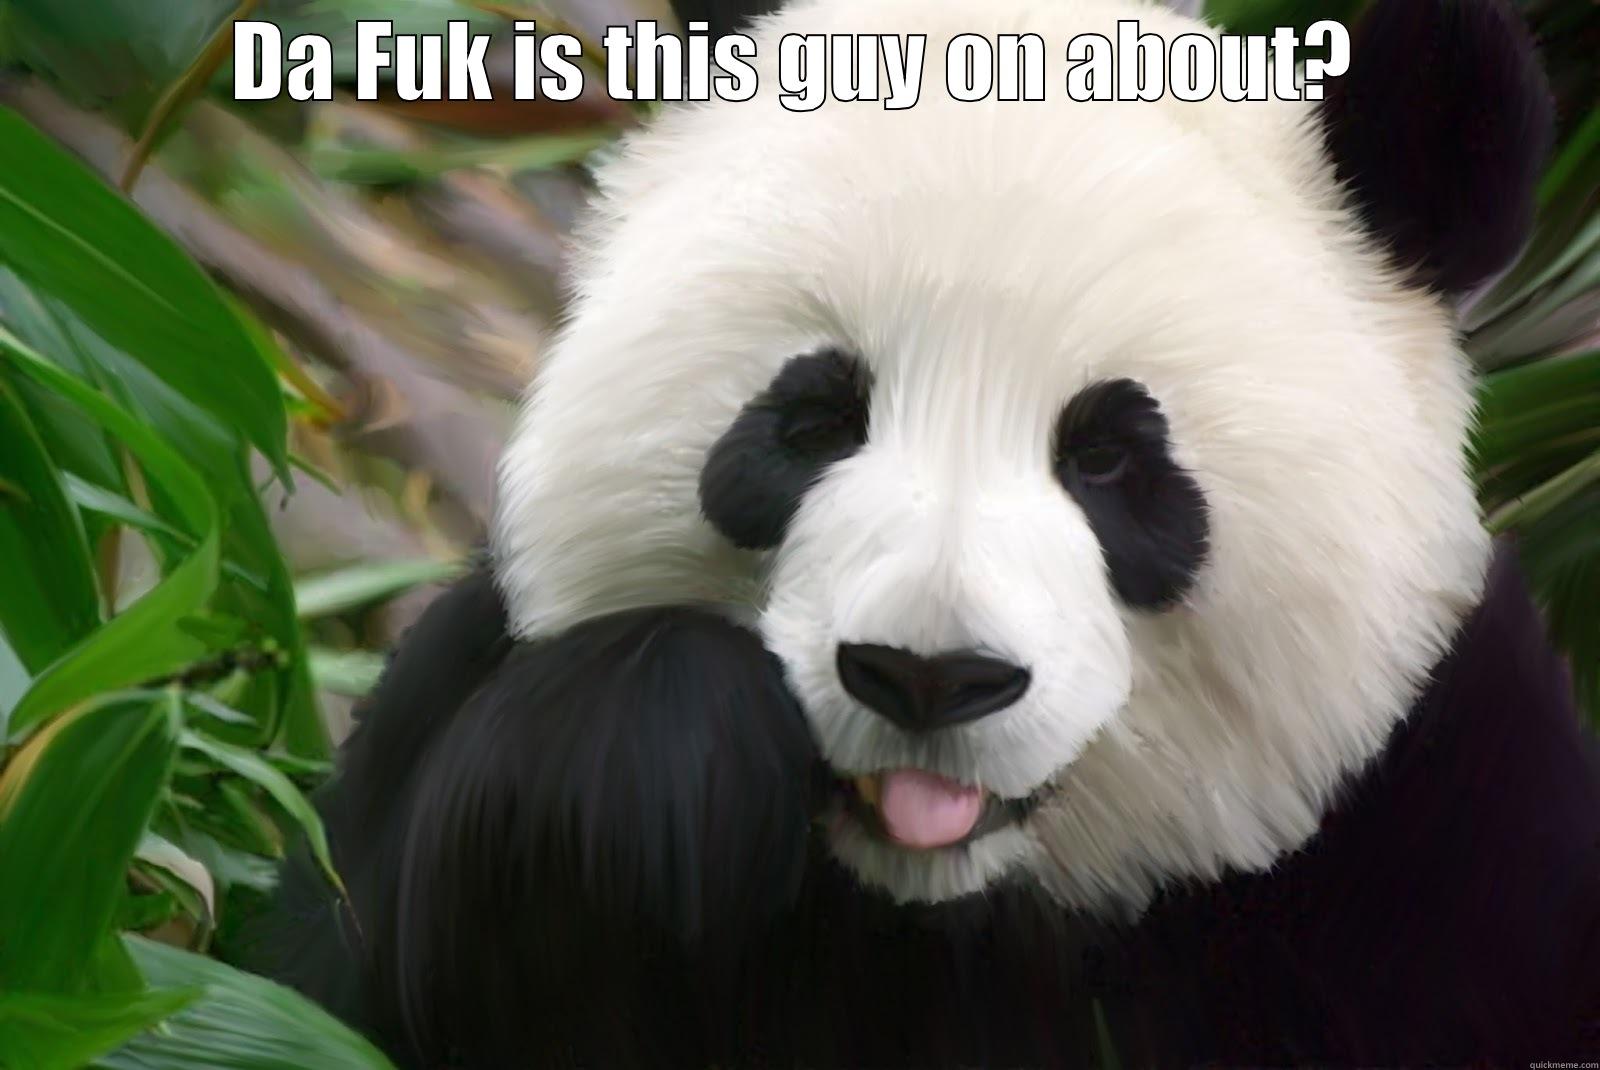 Fat panda surprise - DA FUK IS THIS GUY ON ABOUT?  Misc